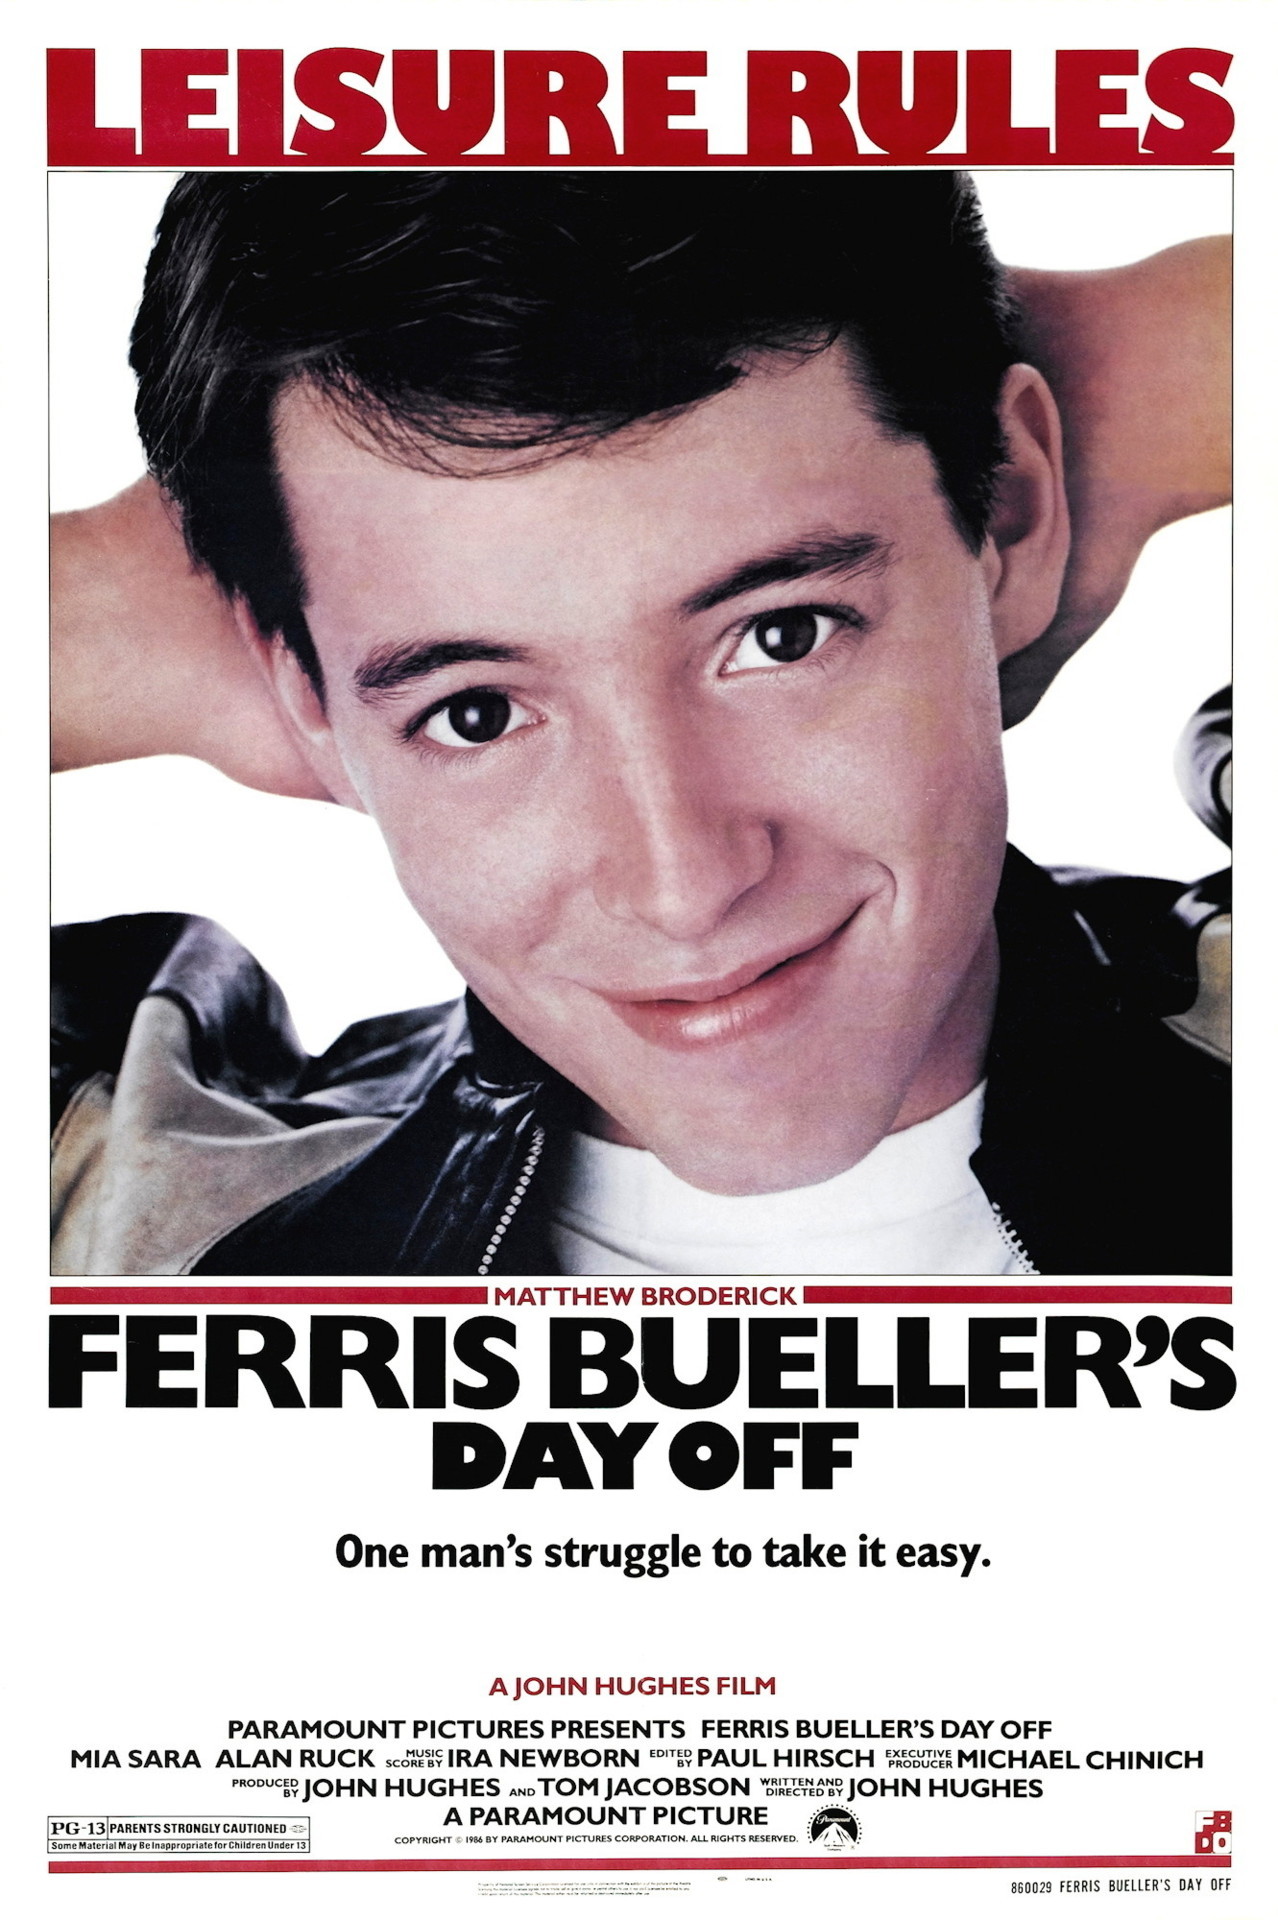 BACK IN THE DAY |6/11/86| The movie, Ferris Bueller&rsquo;s Day Off, is released